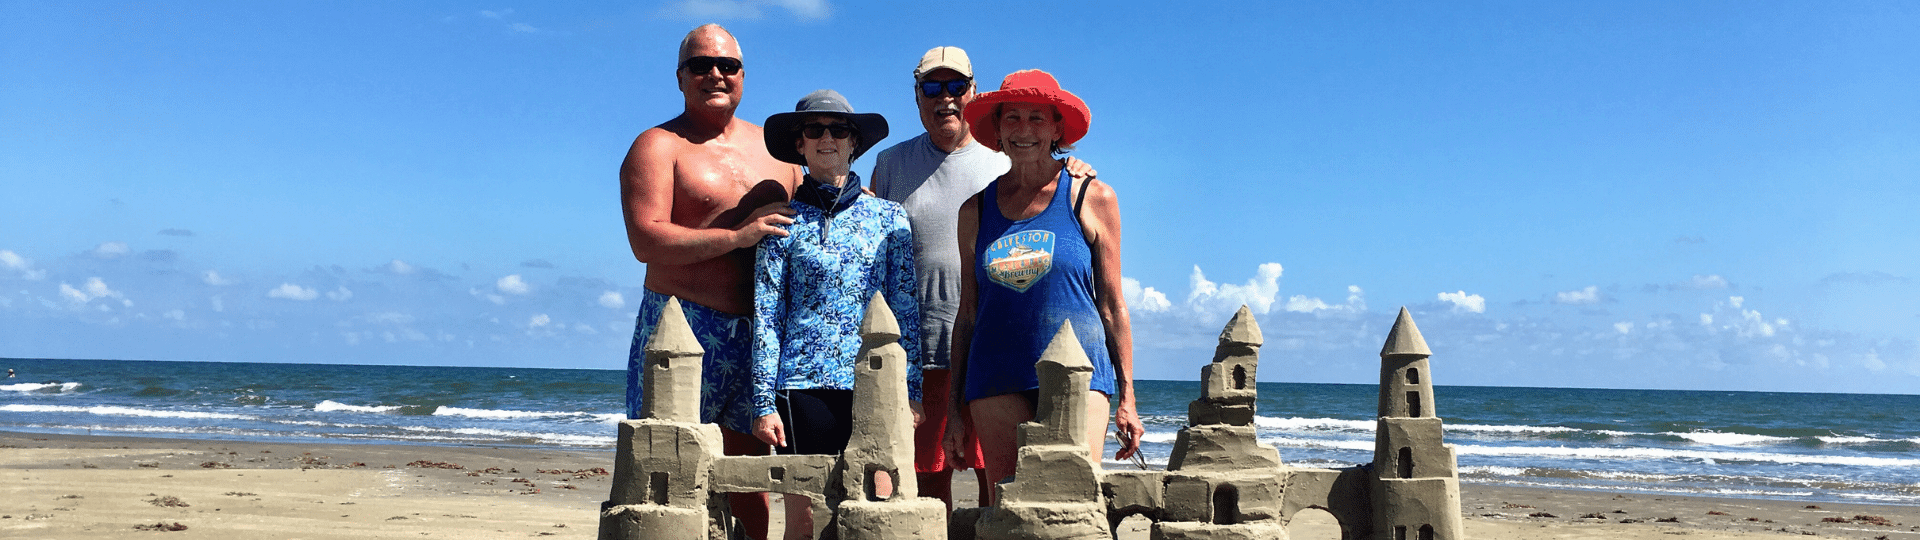 Family standing in front of sand castle in Galveston tx